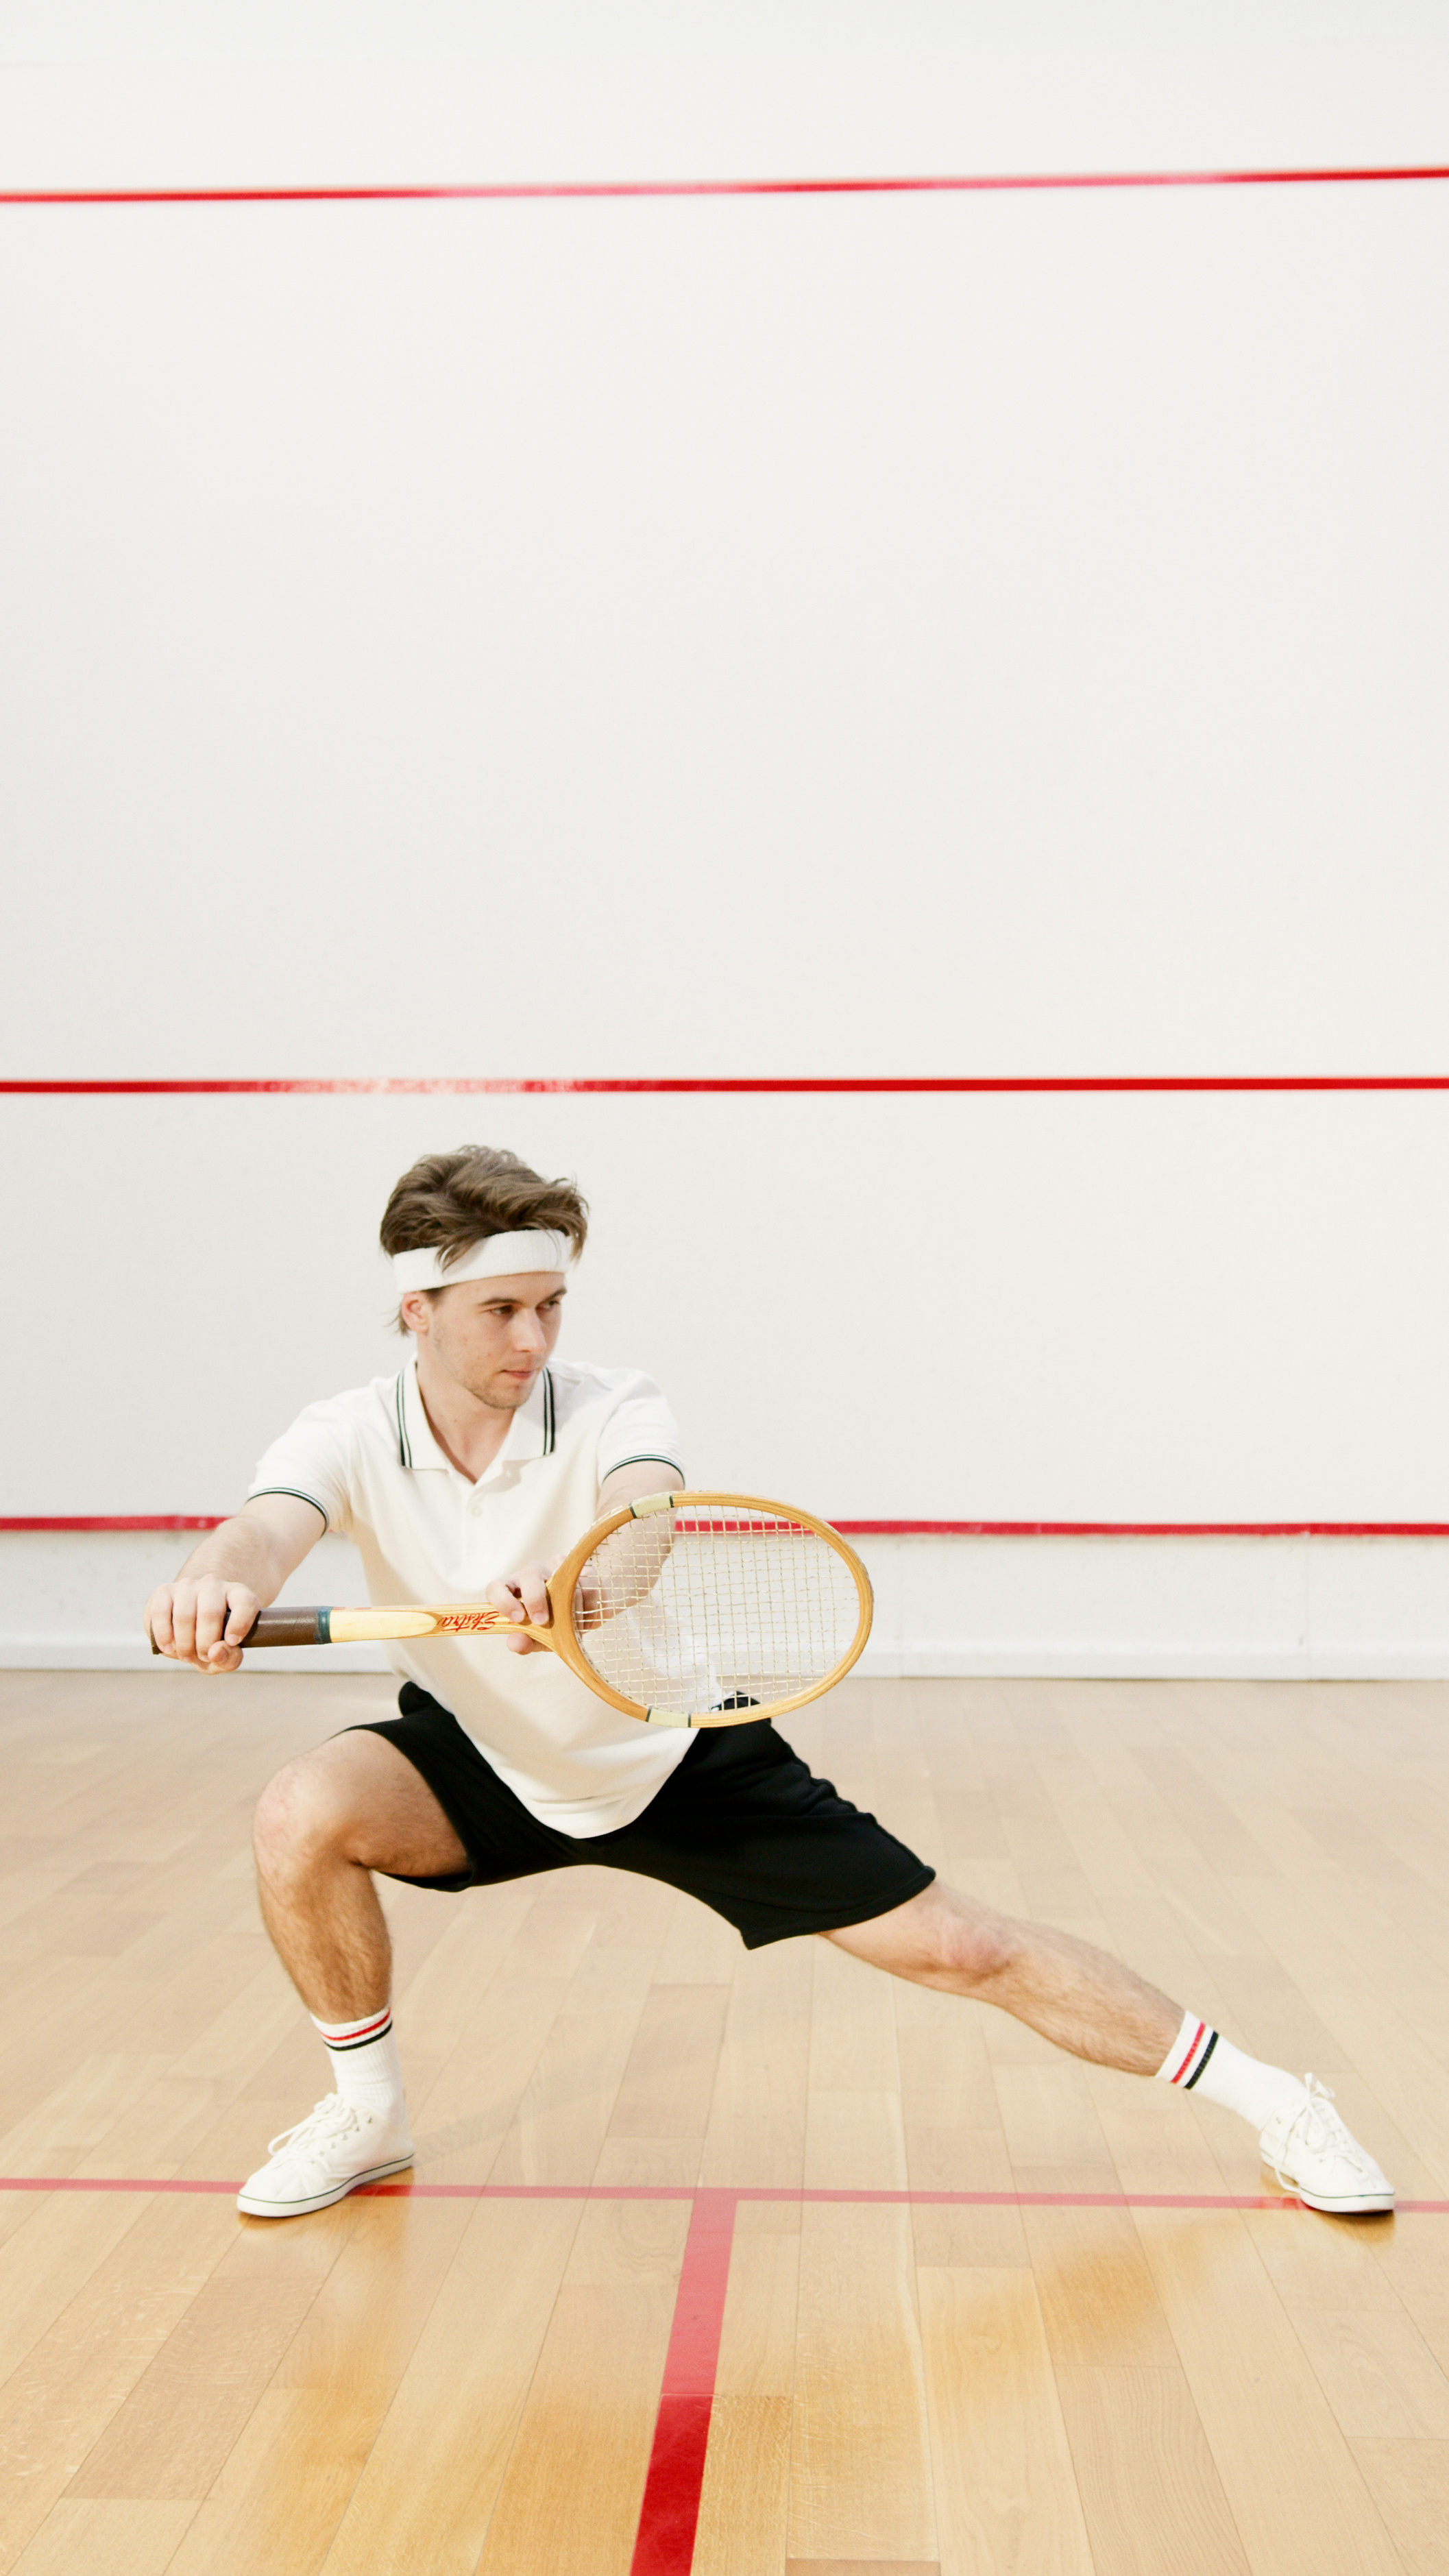 Squash (Sport): A game played in various four-walled courts, Indoor racquet sports. 2120x3760 HD Wallpaper.